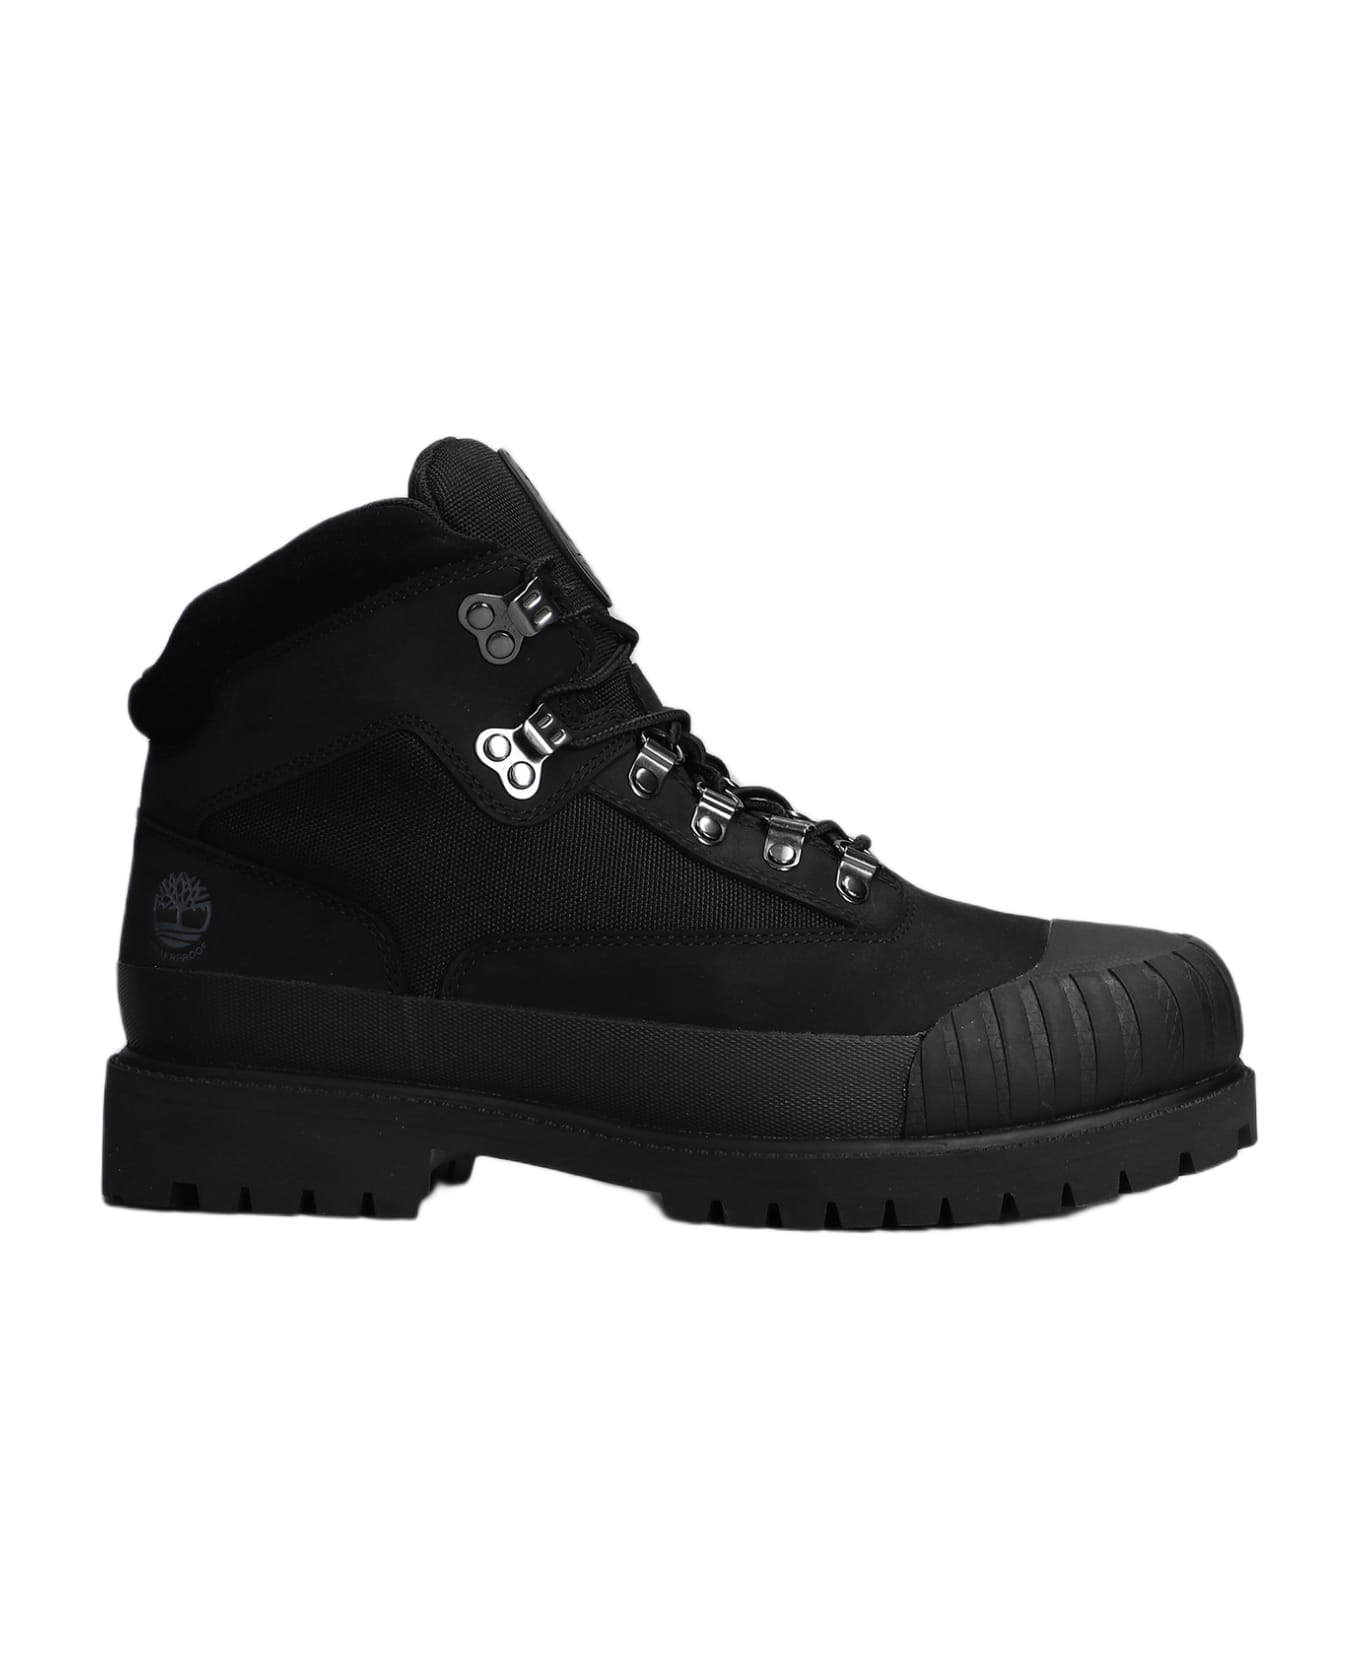 Timberland Heritage Boot Combat Boots In Black Synthetic Fibers - Black ブーツ